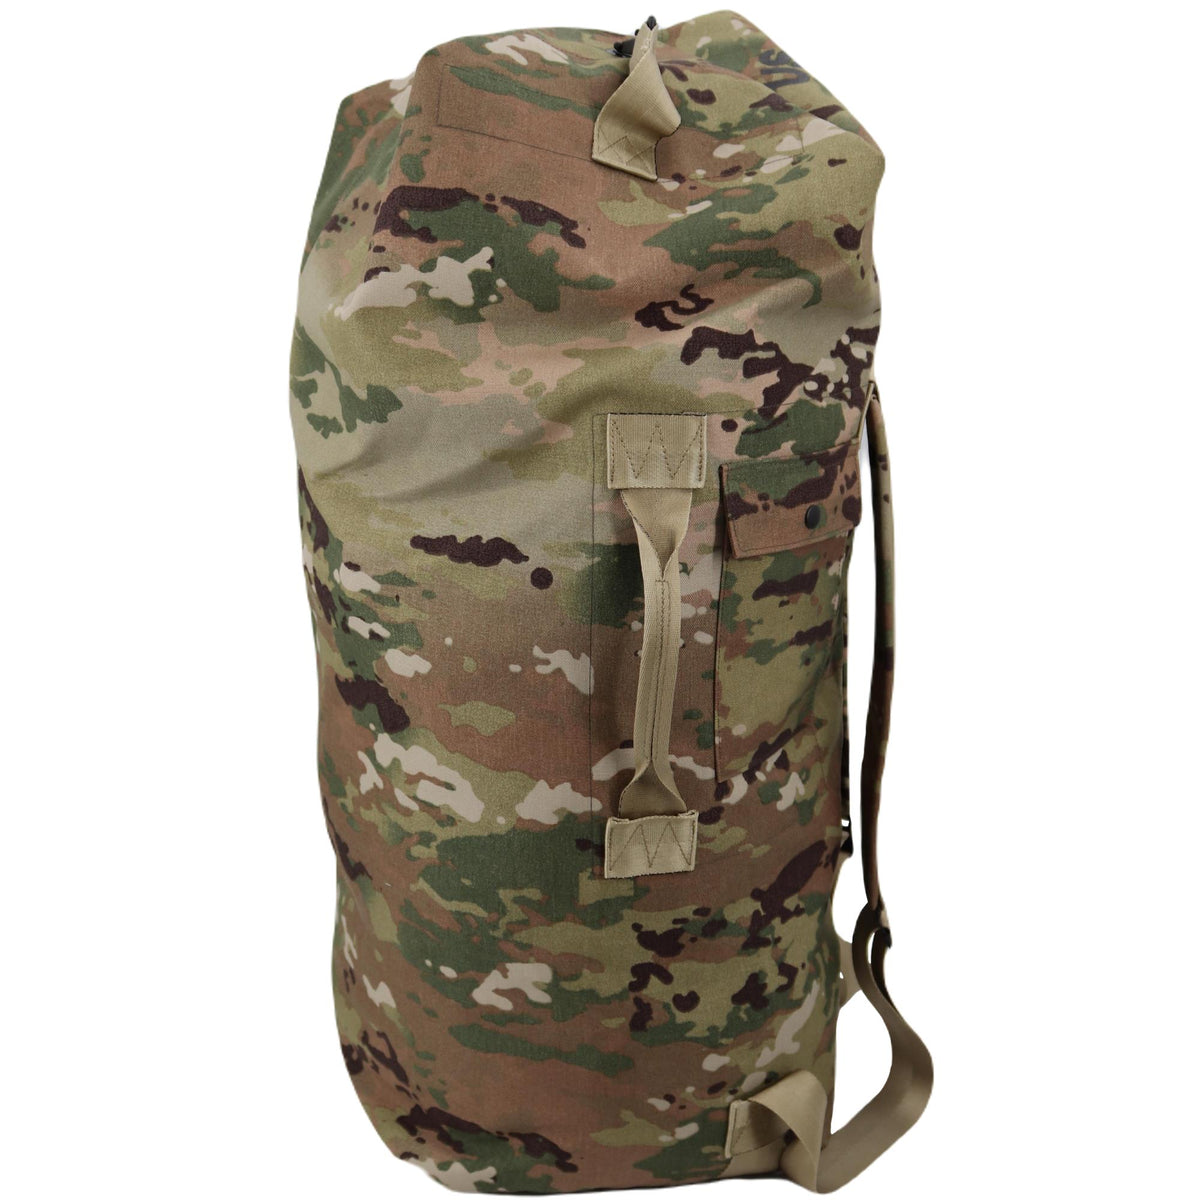 Top Loading Duffel Bag, Nylon Cordura, with Carrying Straps, Sea Bag, Made in USA, OCP Scorpion, Men's, Size: 24